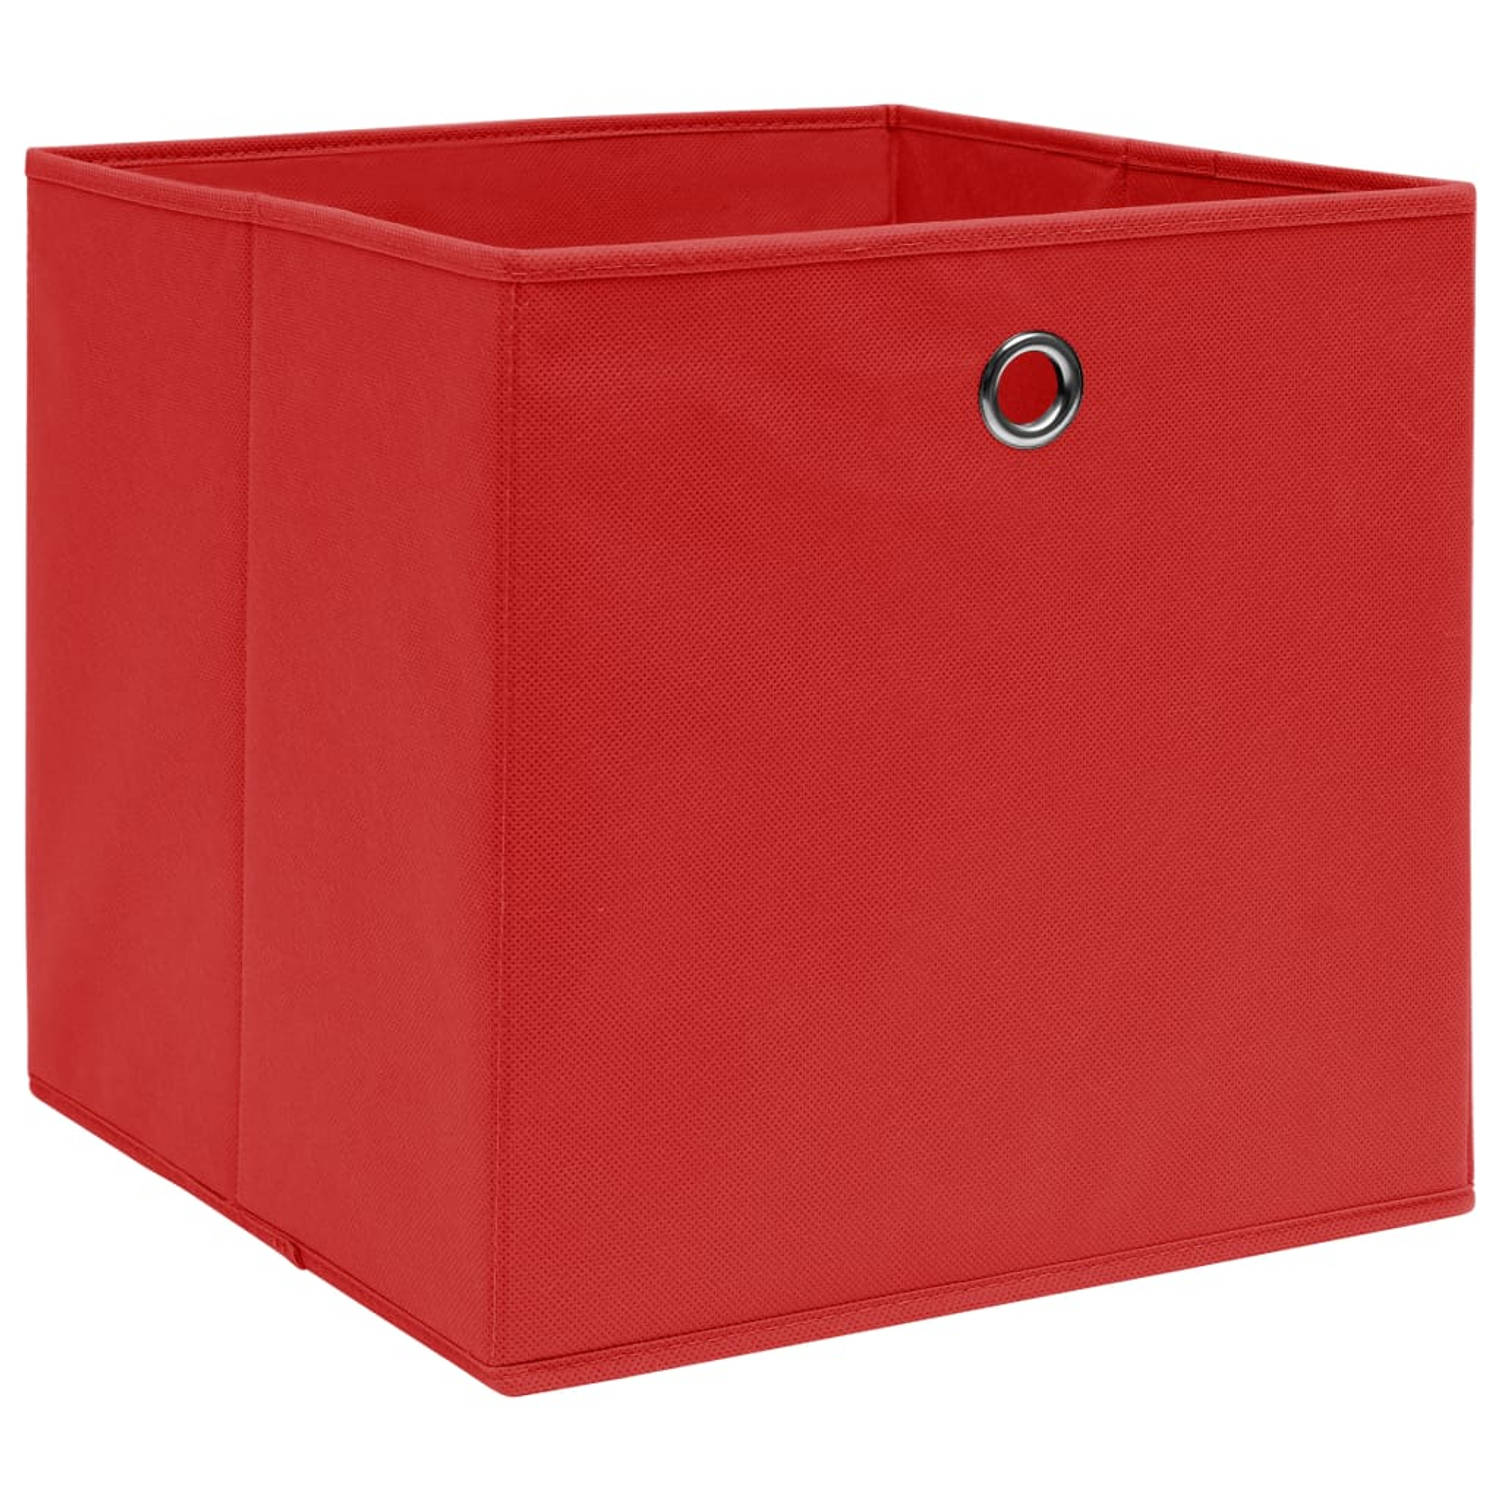 The Living Store Opbergboxen 10 st 28x28x28 cm nonwoven stof rood - Opberger